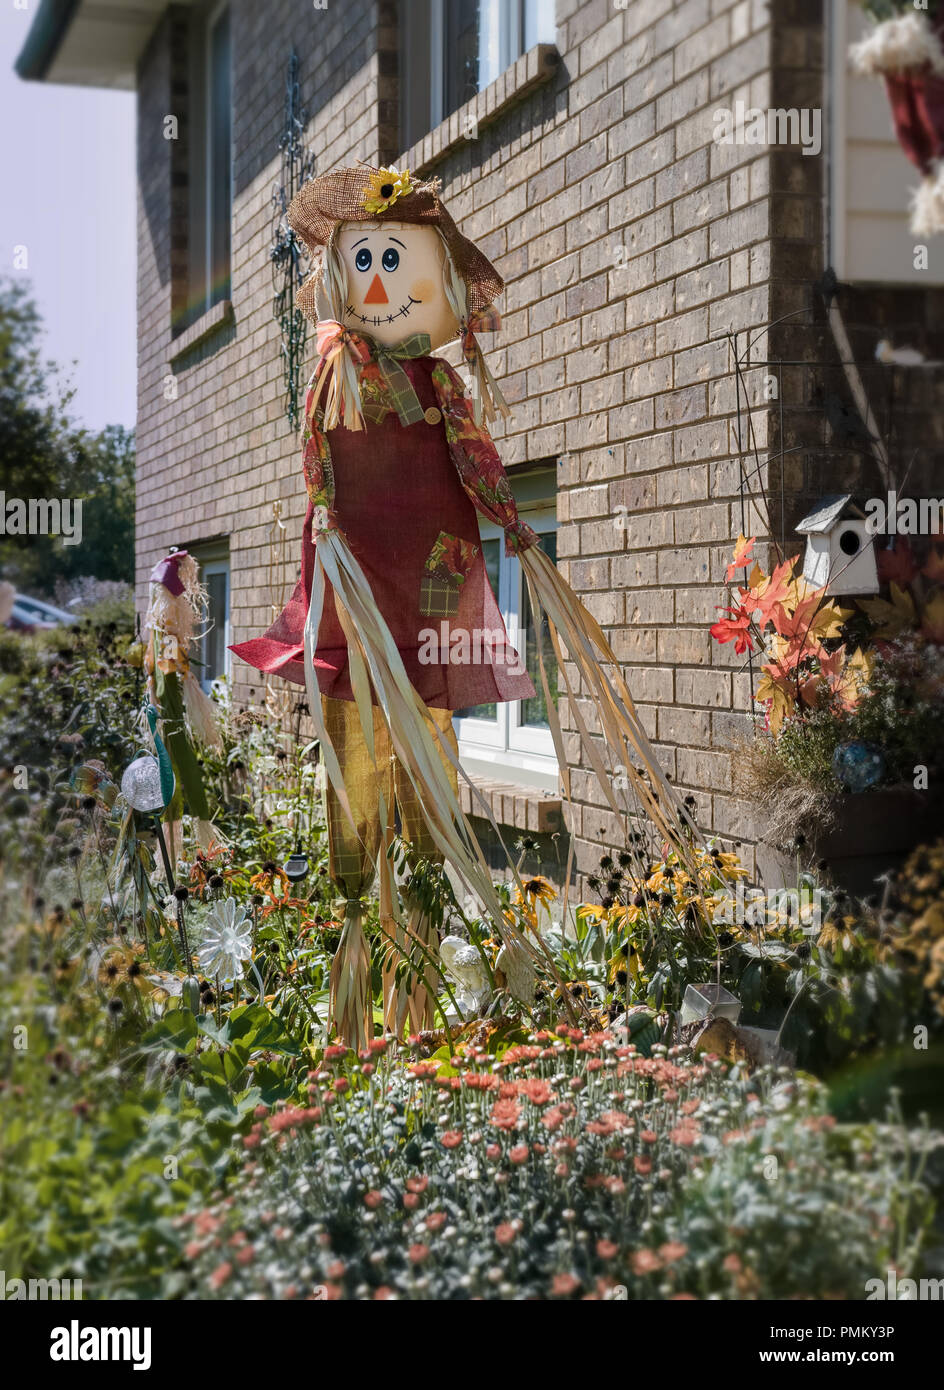 Halloween, outside decorations, straw man, scarecrows in front of the house. Stock Photo